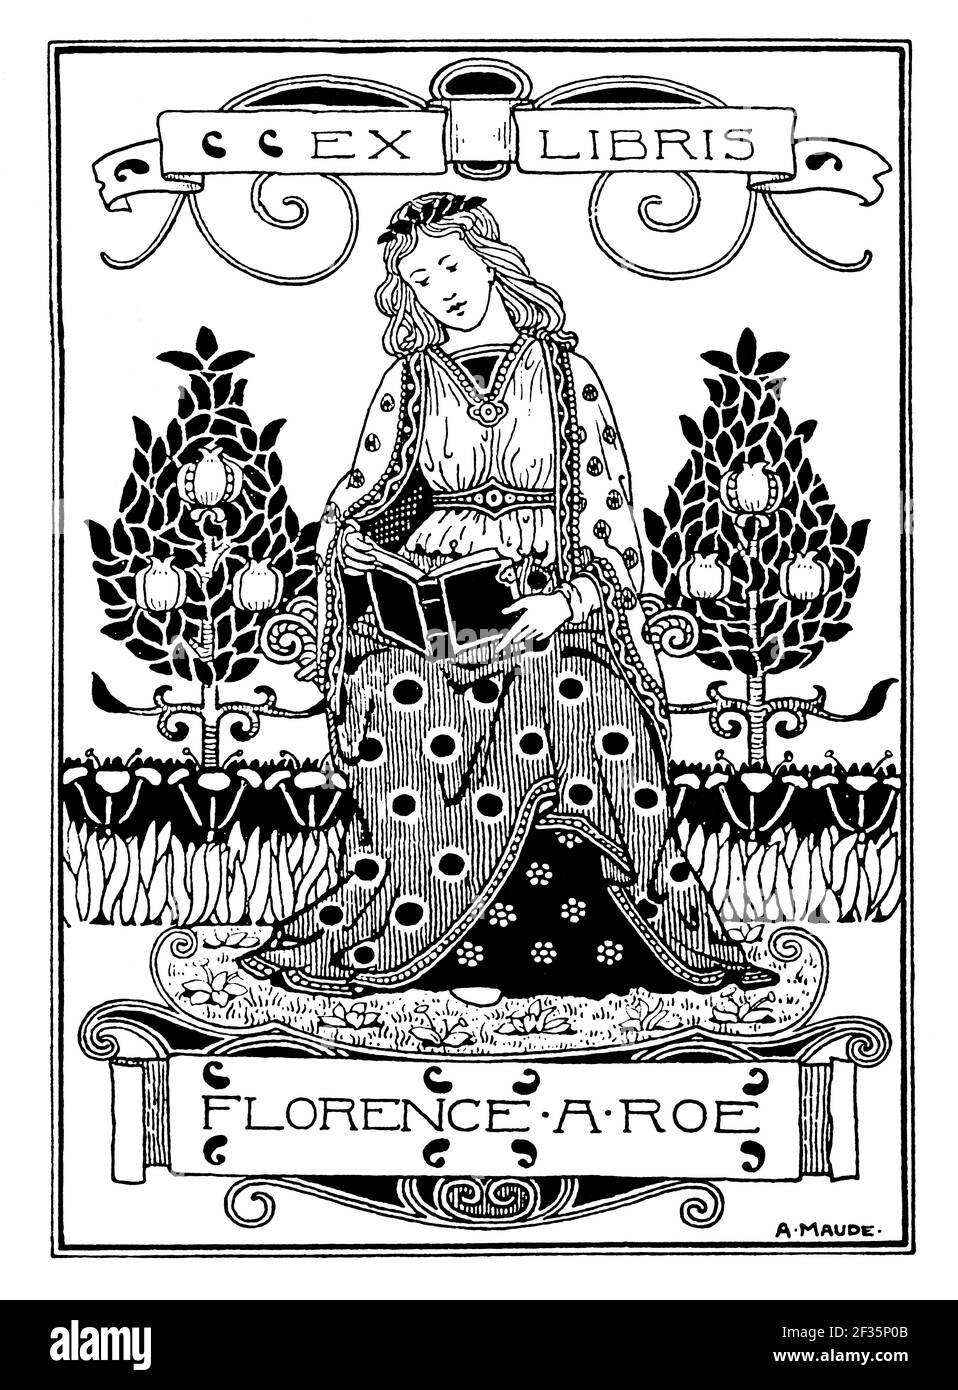 woman reading in medieval dress bookplate design by Arthur Maude Stock Photo